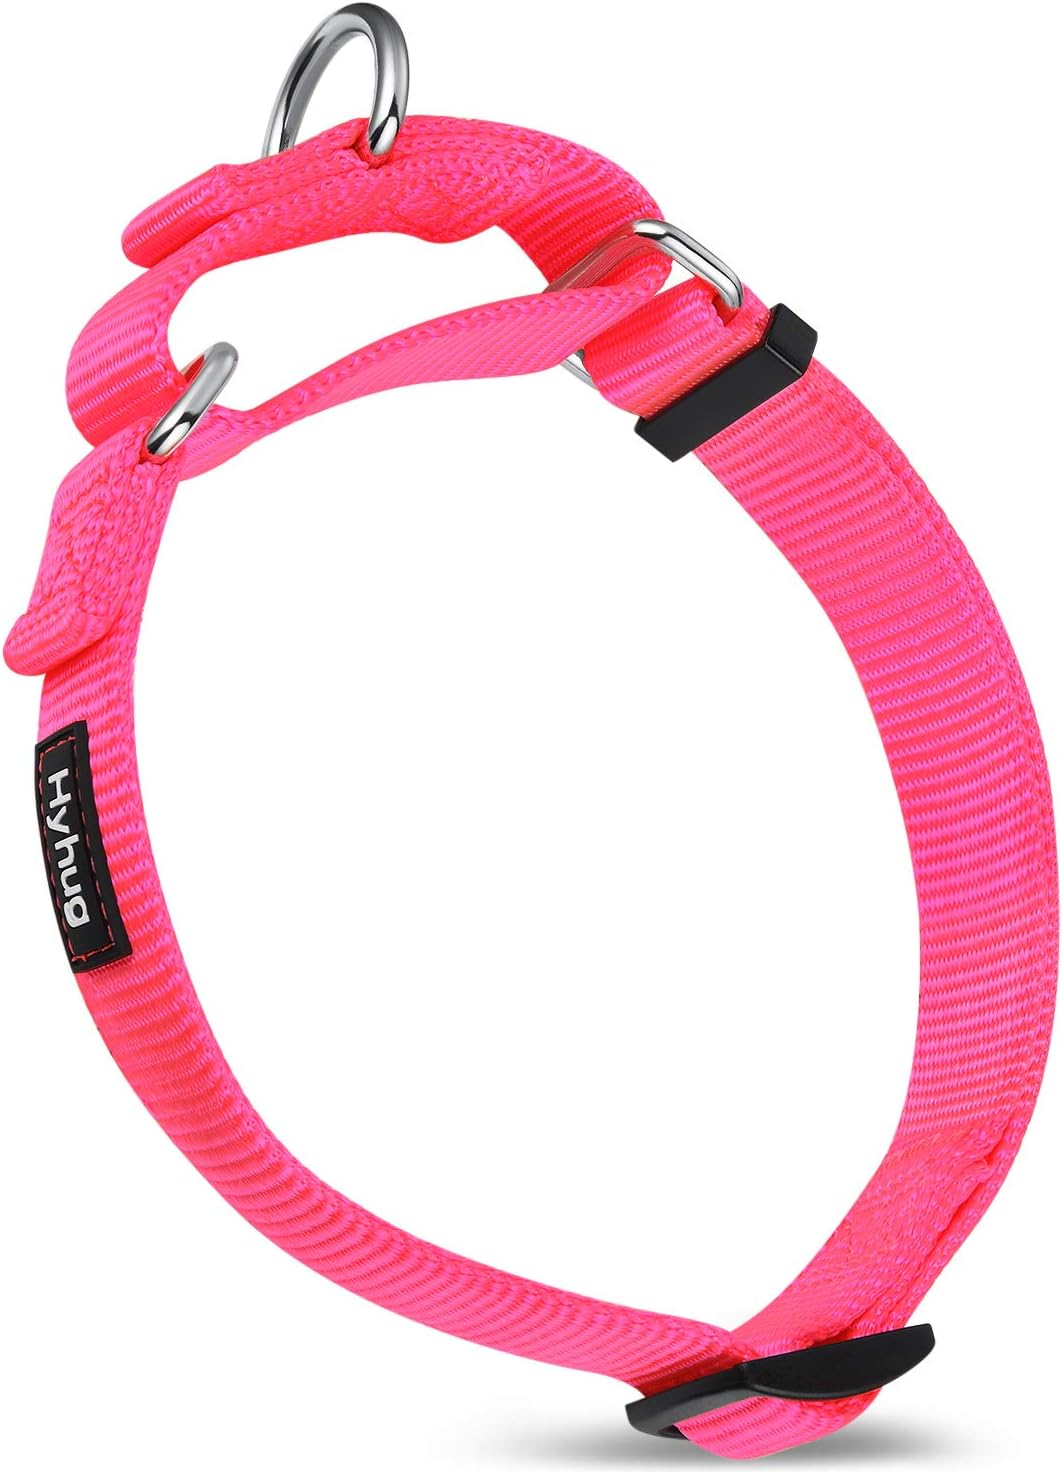 Premium Upgraded Heavy Duty Anti-Slip Martingale Dog Collar for Medium Girl Dogs Comfy and Safe - Walking, Professional Training, Daily Use. (Medium, Hot Pink)